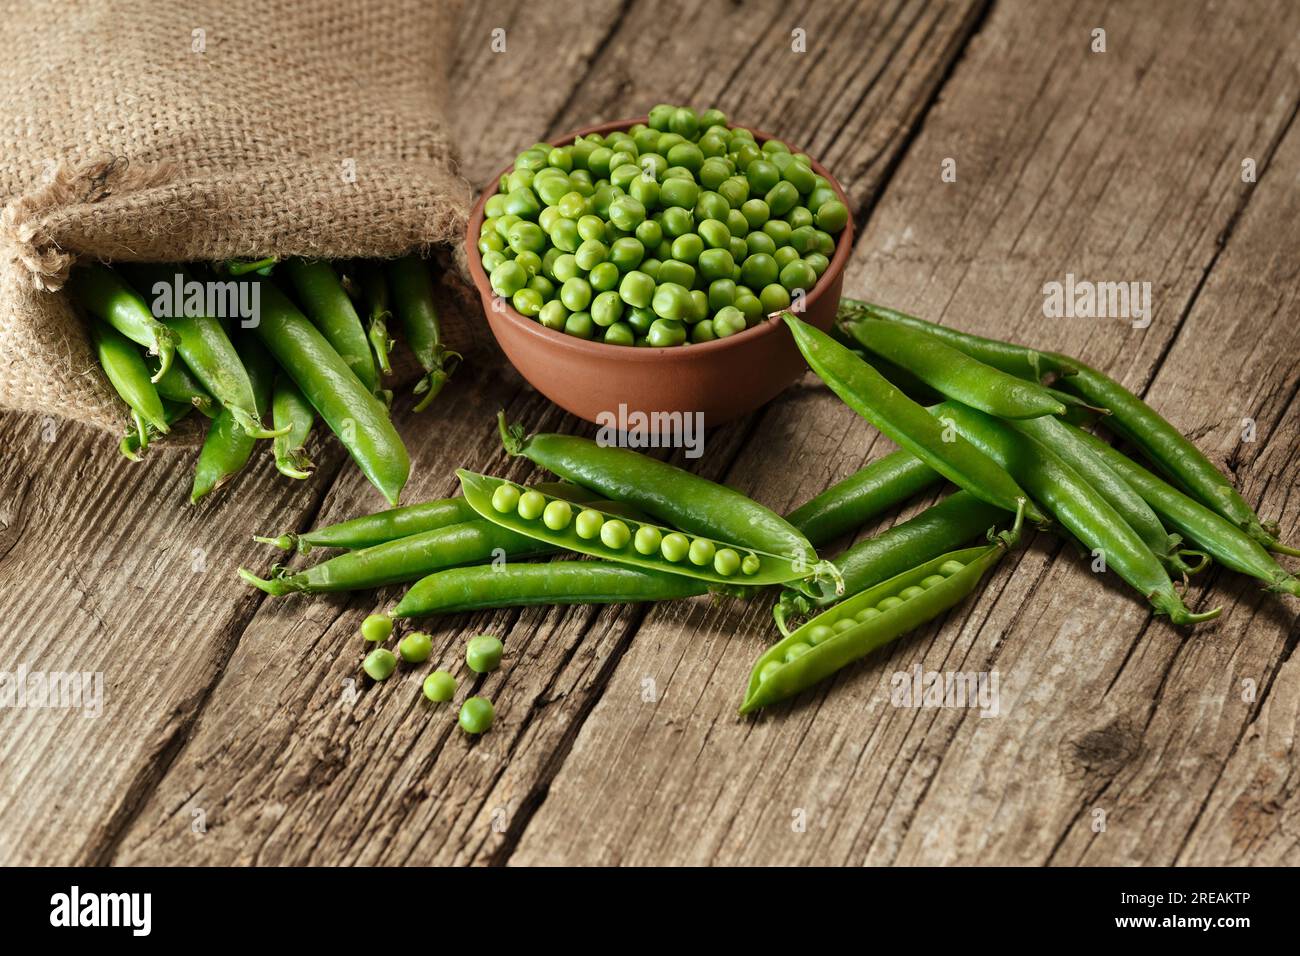 Pods of fresh green peas in a burlap bag, shelled peas in a clay bowl, sweet organic green peas in closed and open pods on an aged wooden background. Stock Photo